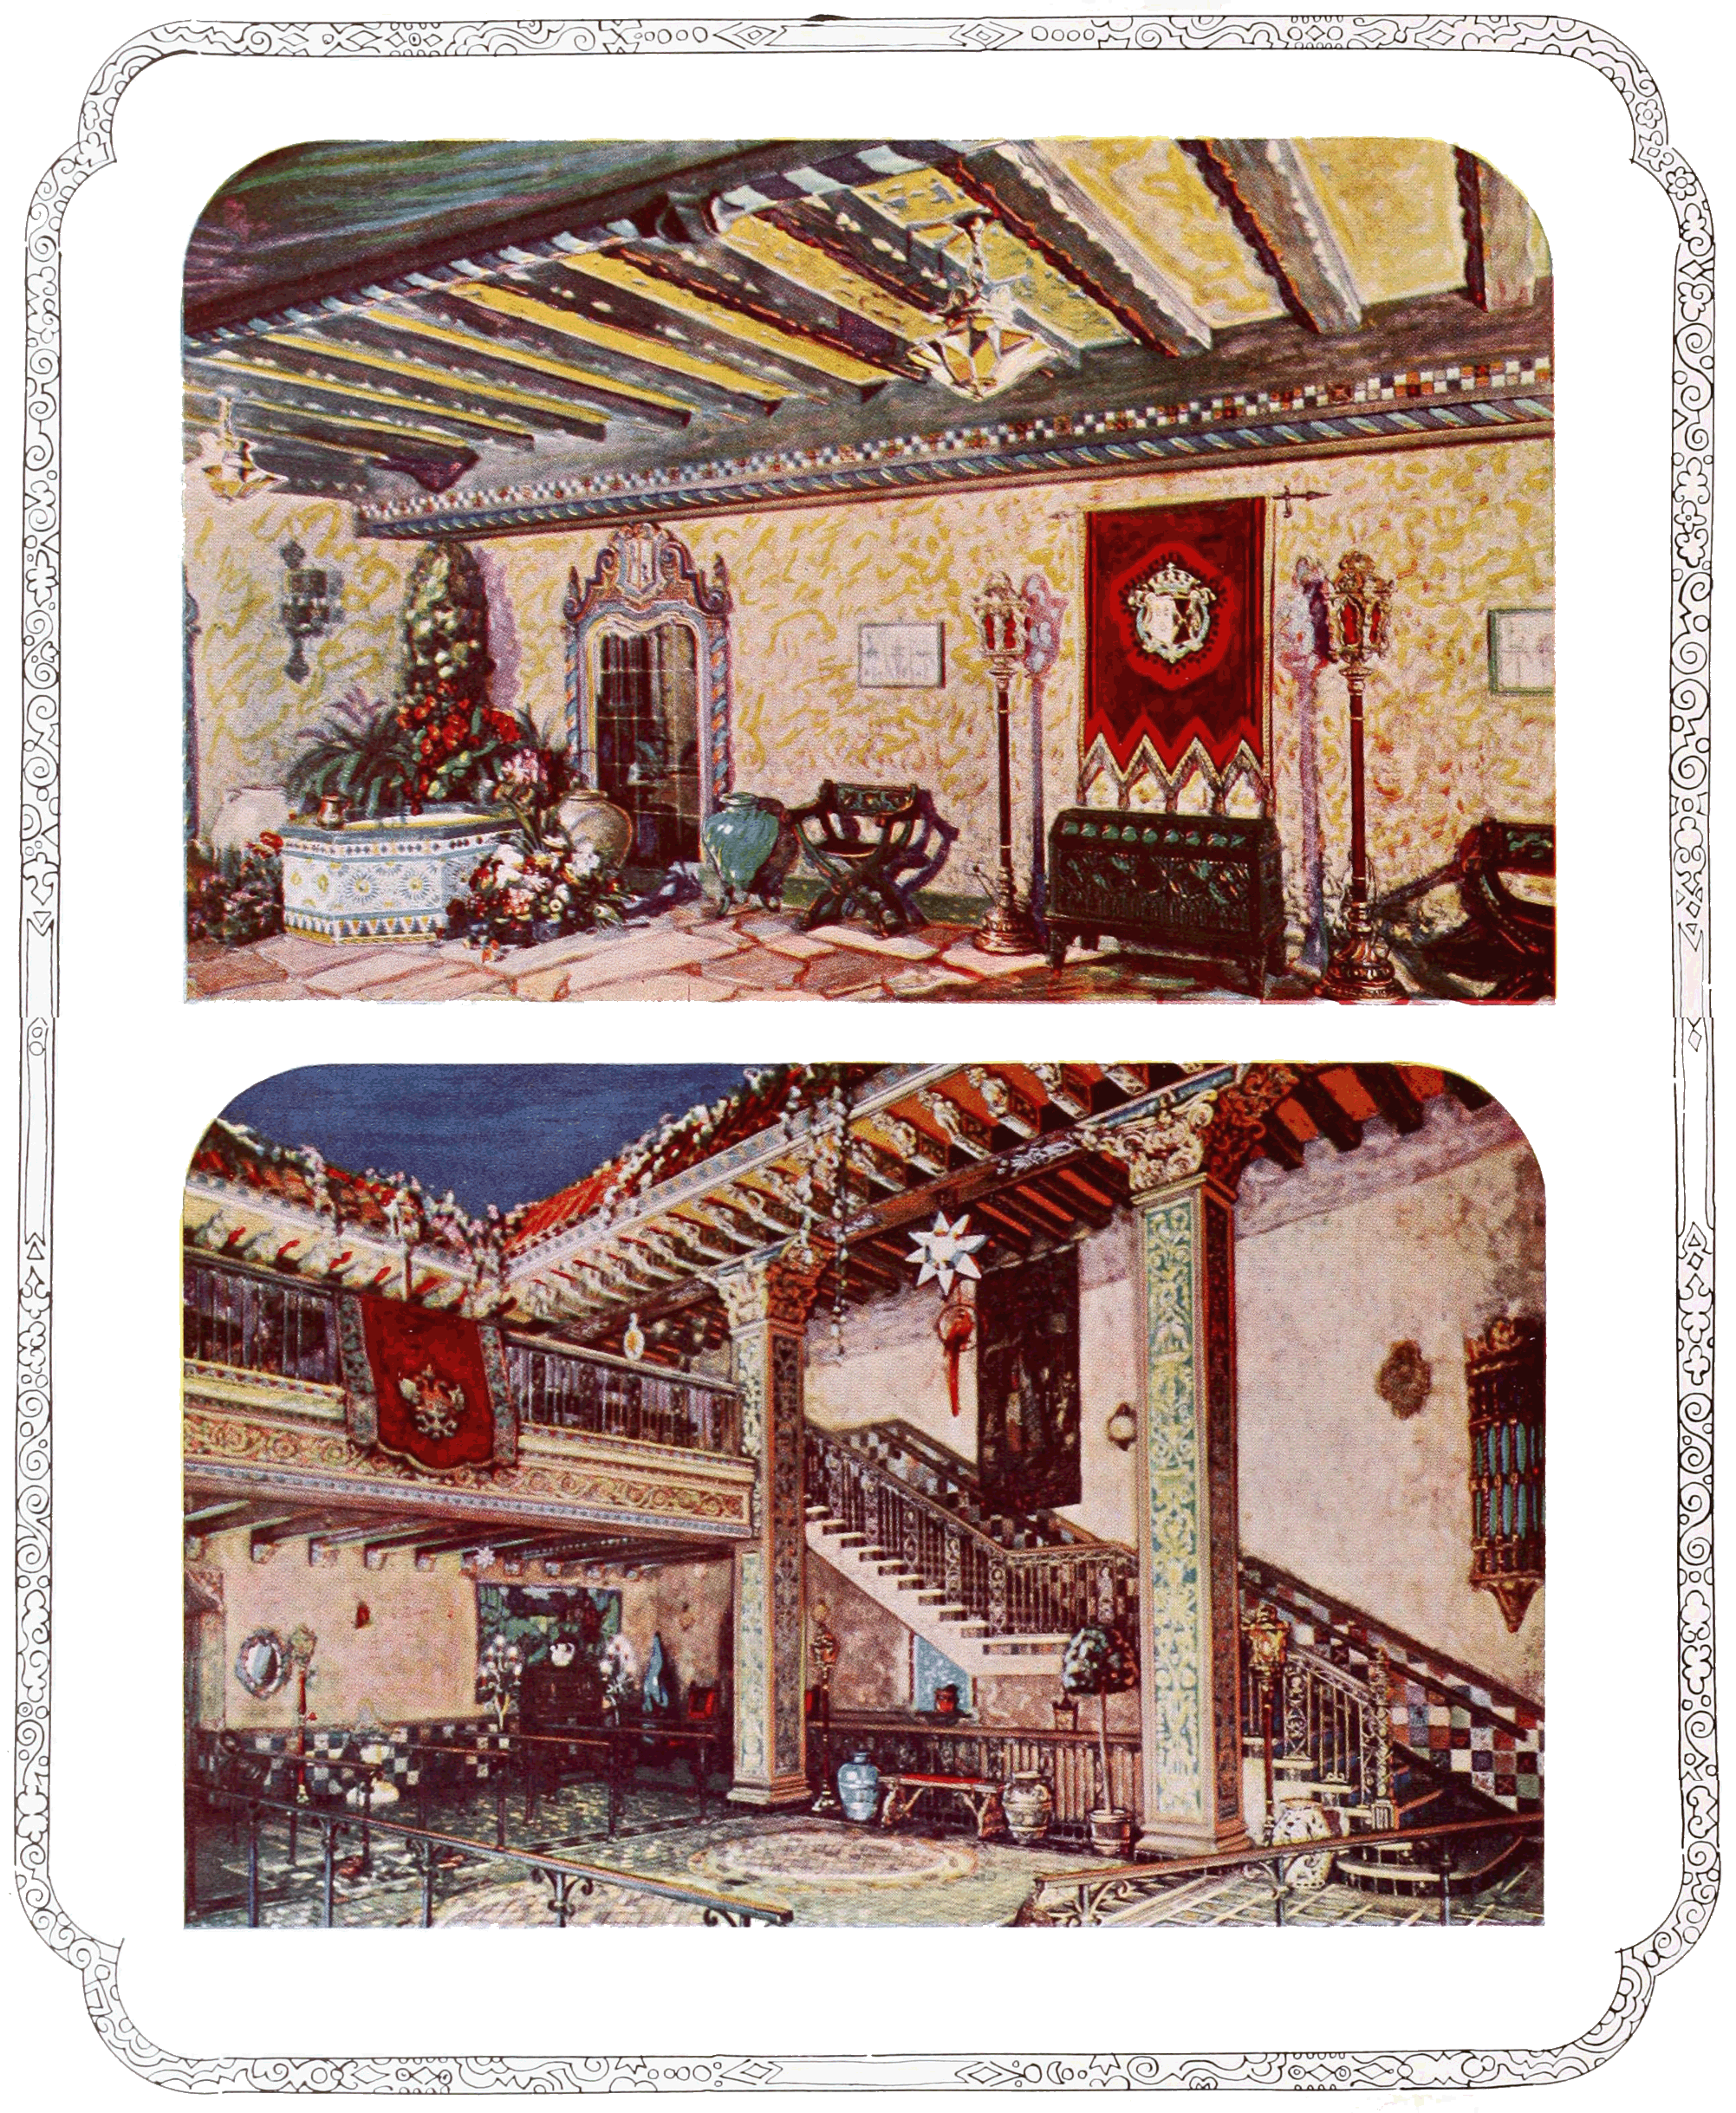 Rustic Spanish Courtyard (top); Two-story Atmosphere Lobby (bottom)